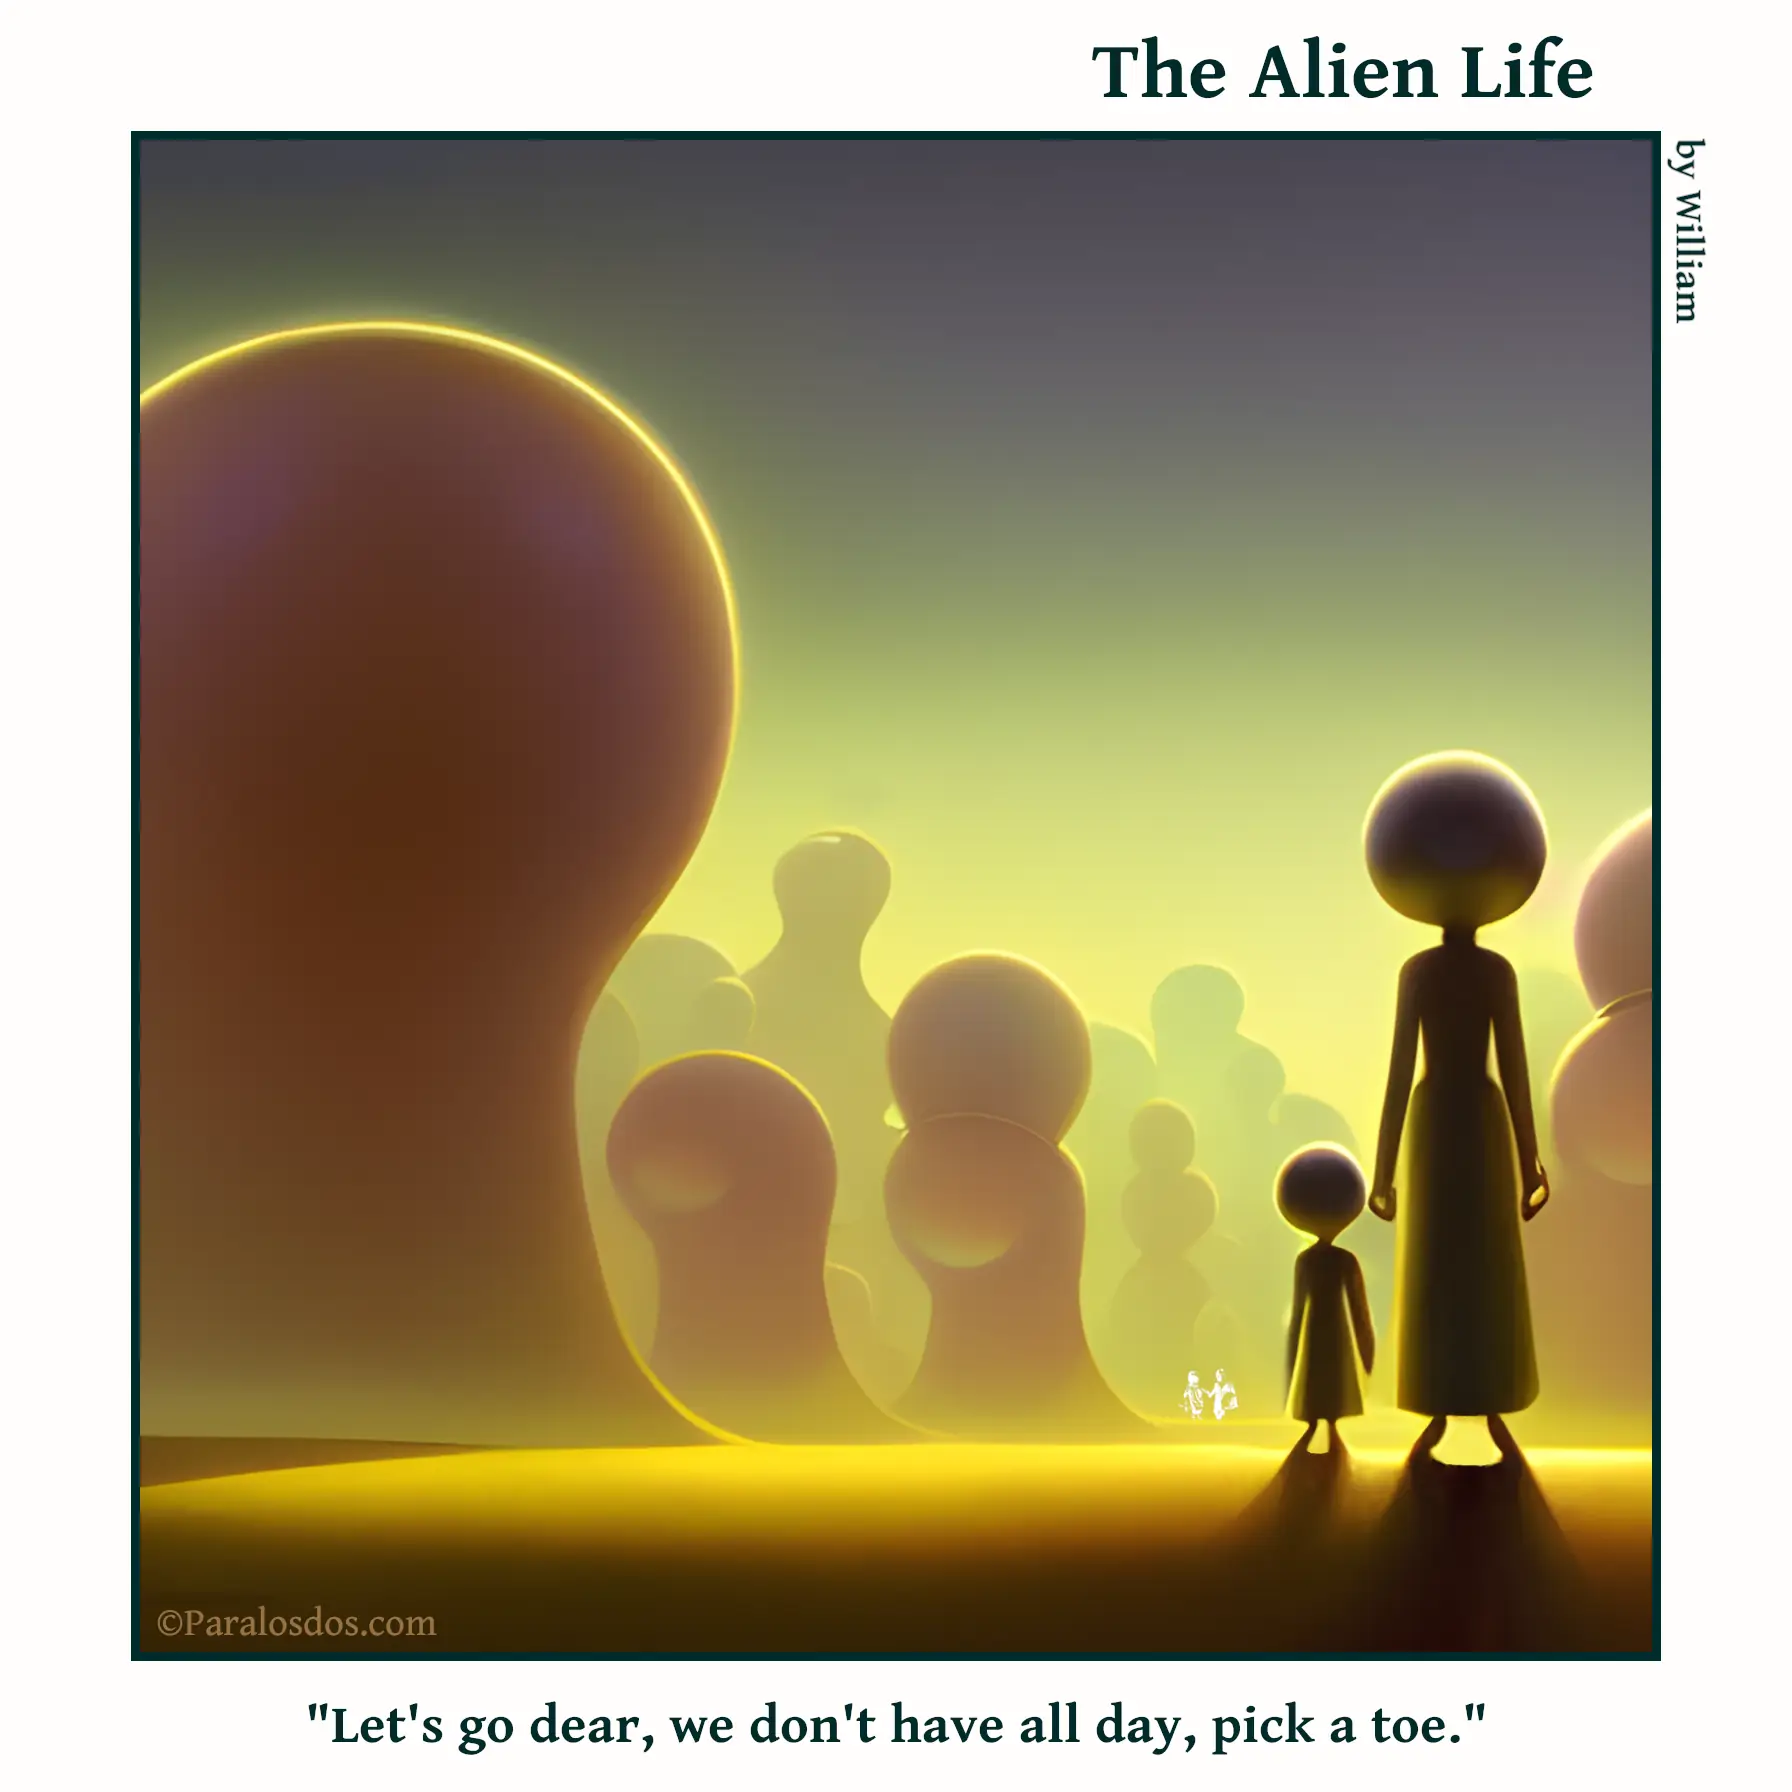 The Alien Life, one panel Comic. An alien mother and daughter are standing in front of a field of what look like toes. The caption reads: "Let's go dear, we don't have all day, pick a toe."